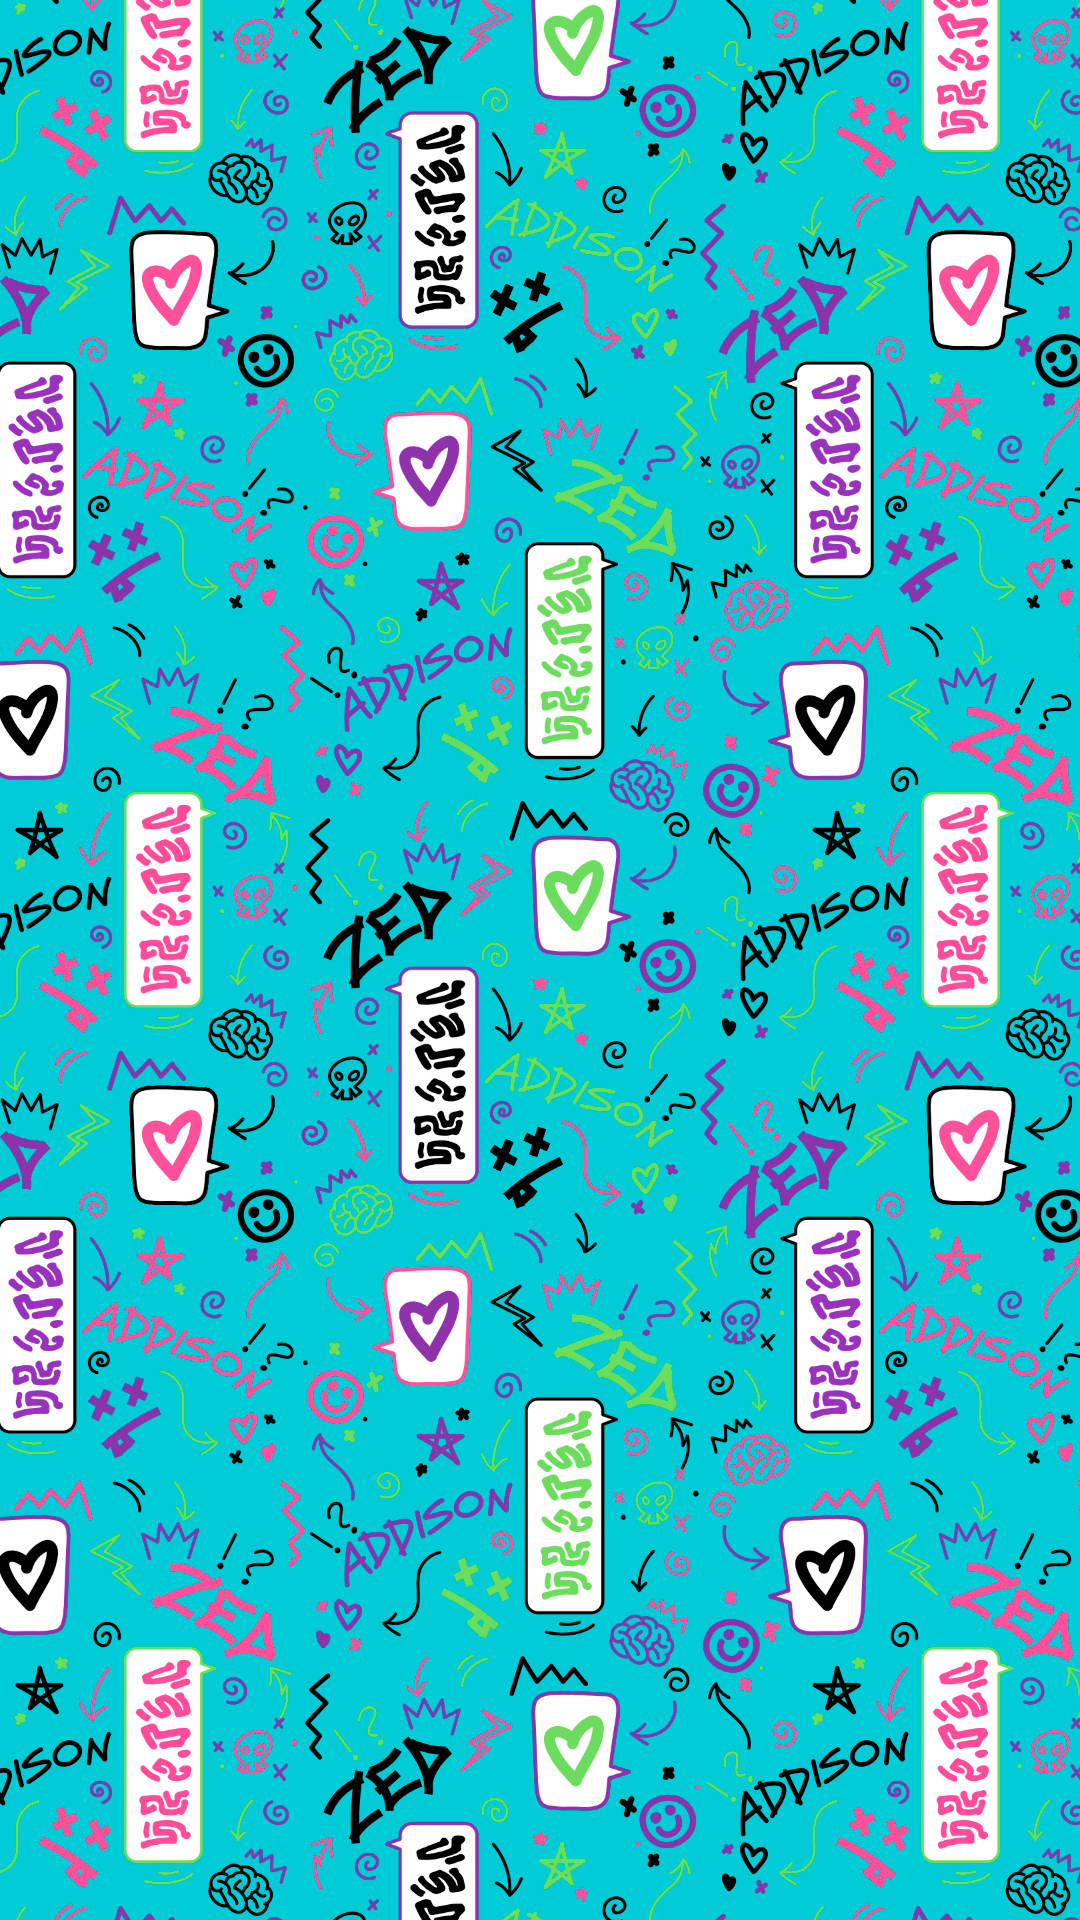 "Discover the Magic of Disney Pattern" Wallpaper